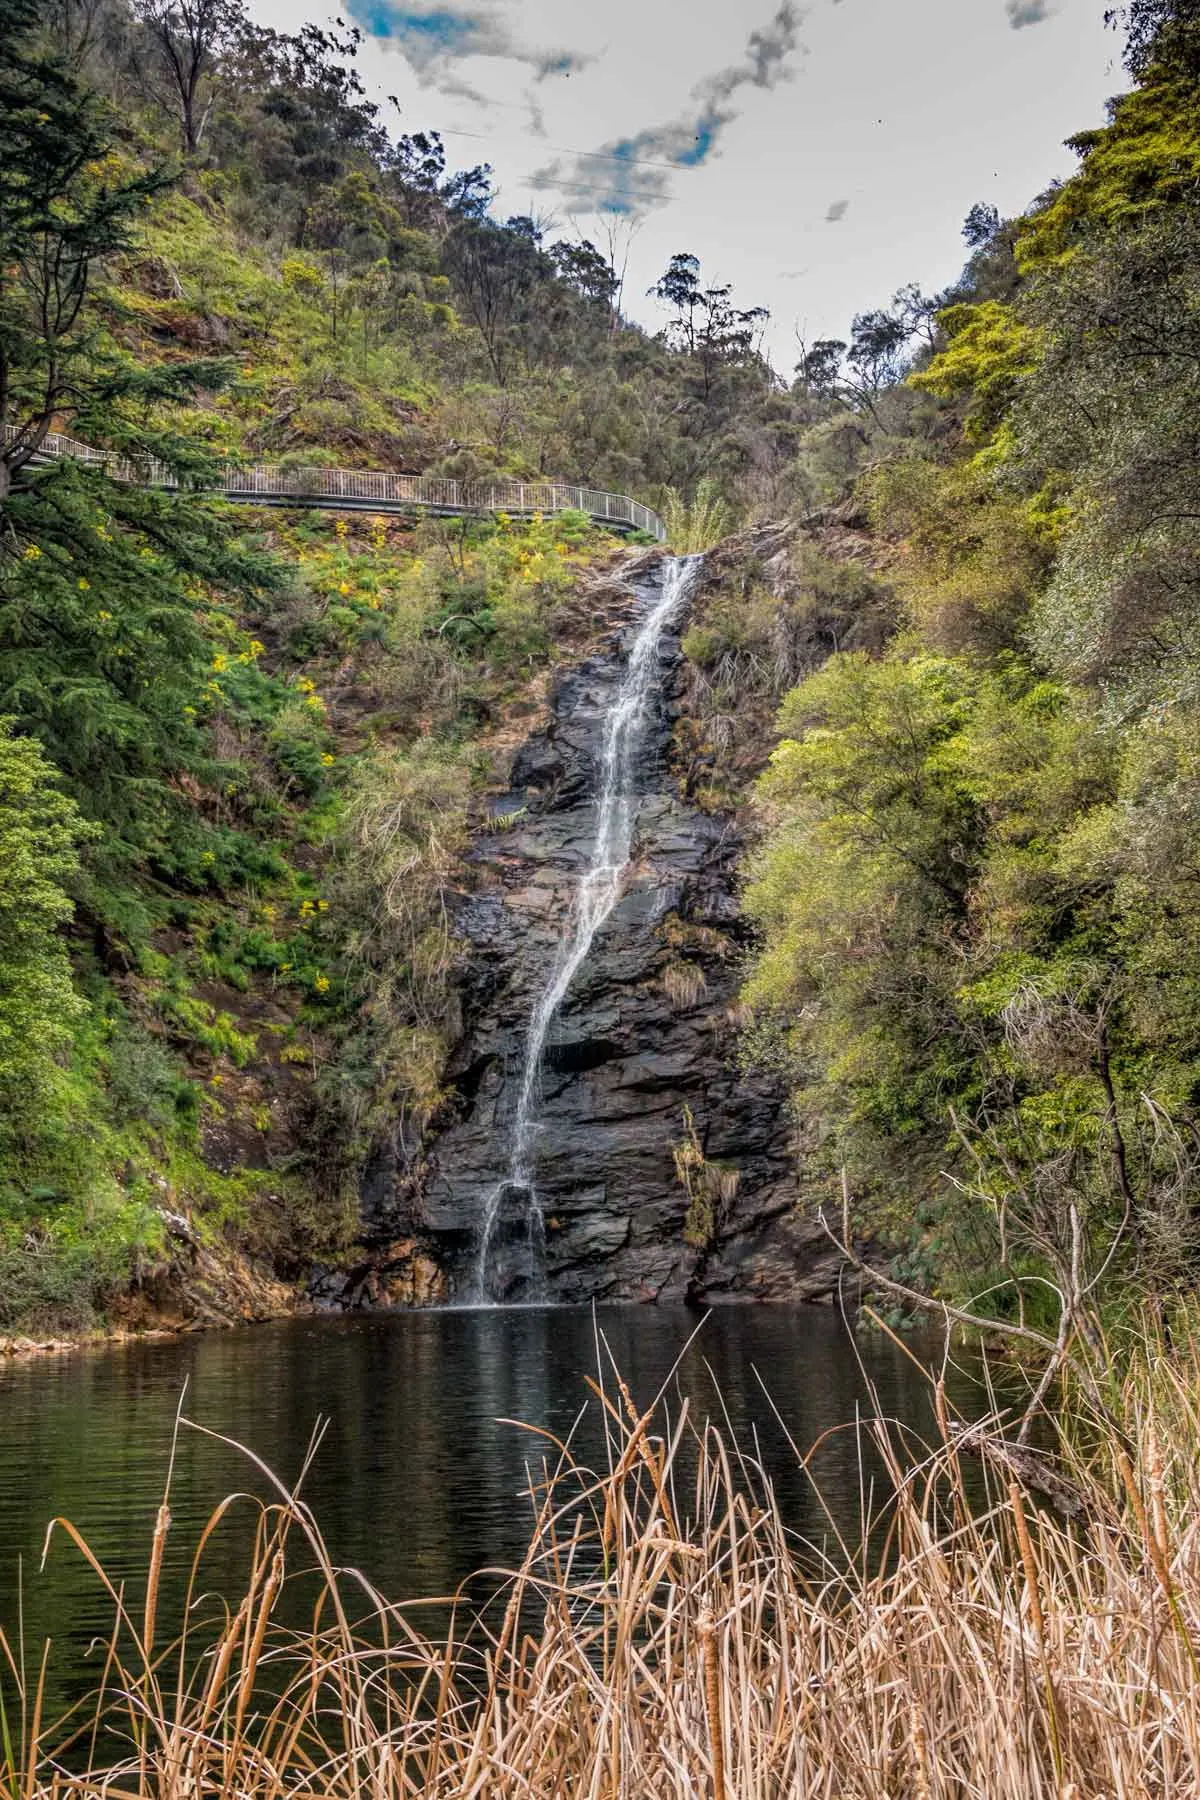 First waterfall at Waterfall Gully